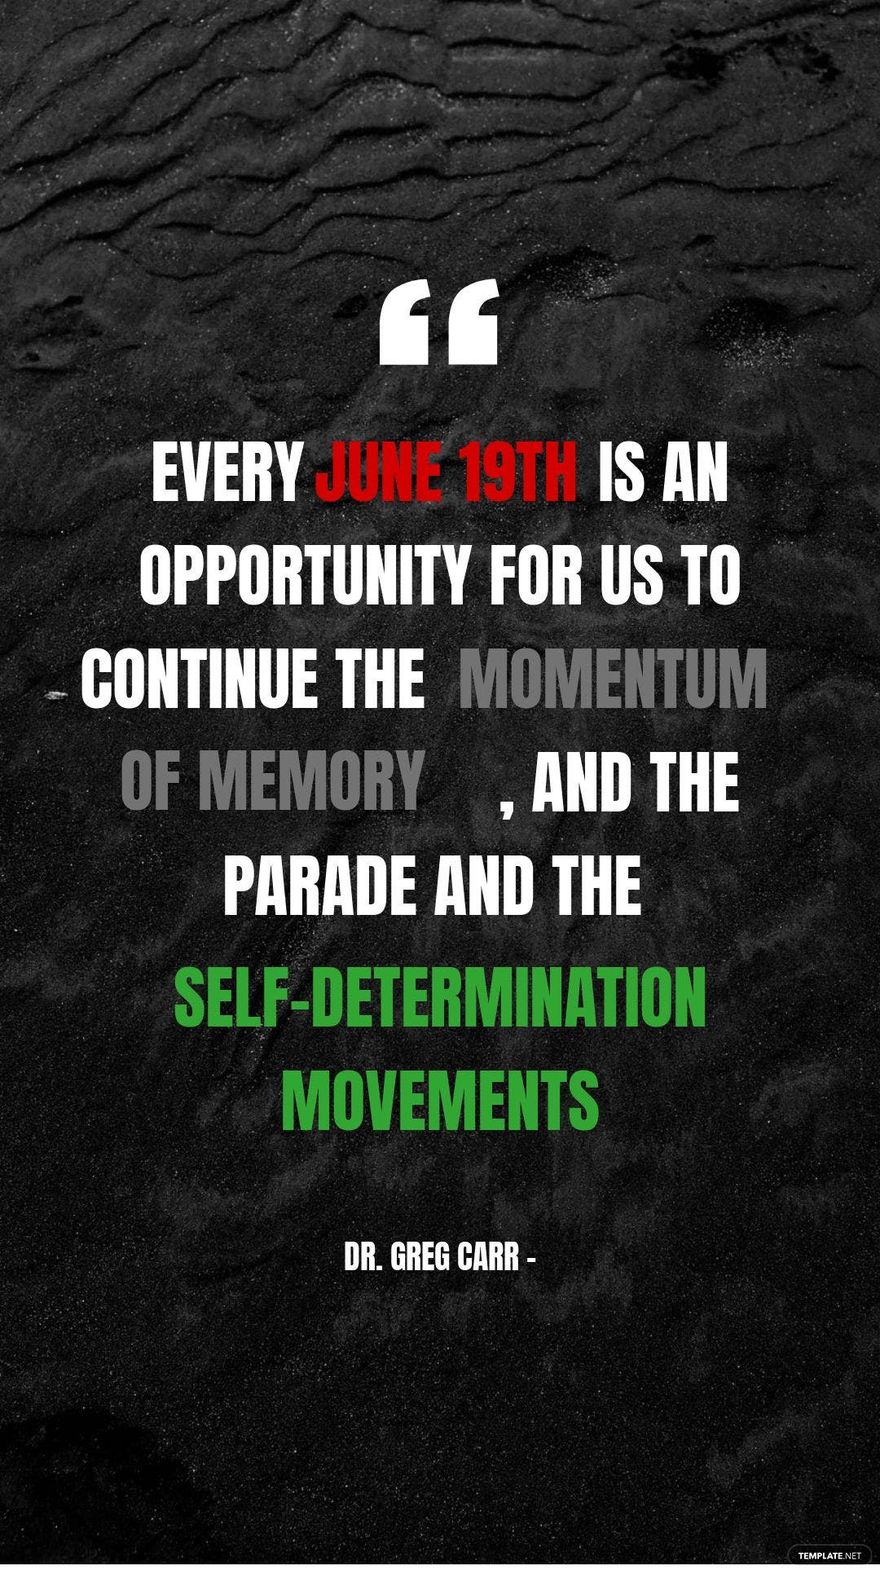 Dr. Greg Carr - Every June 19th is an opportunity for us to continue the momentum of memory, and the parade and the self-determination movements. in JPG